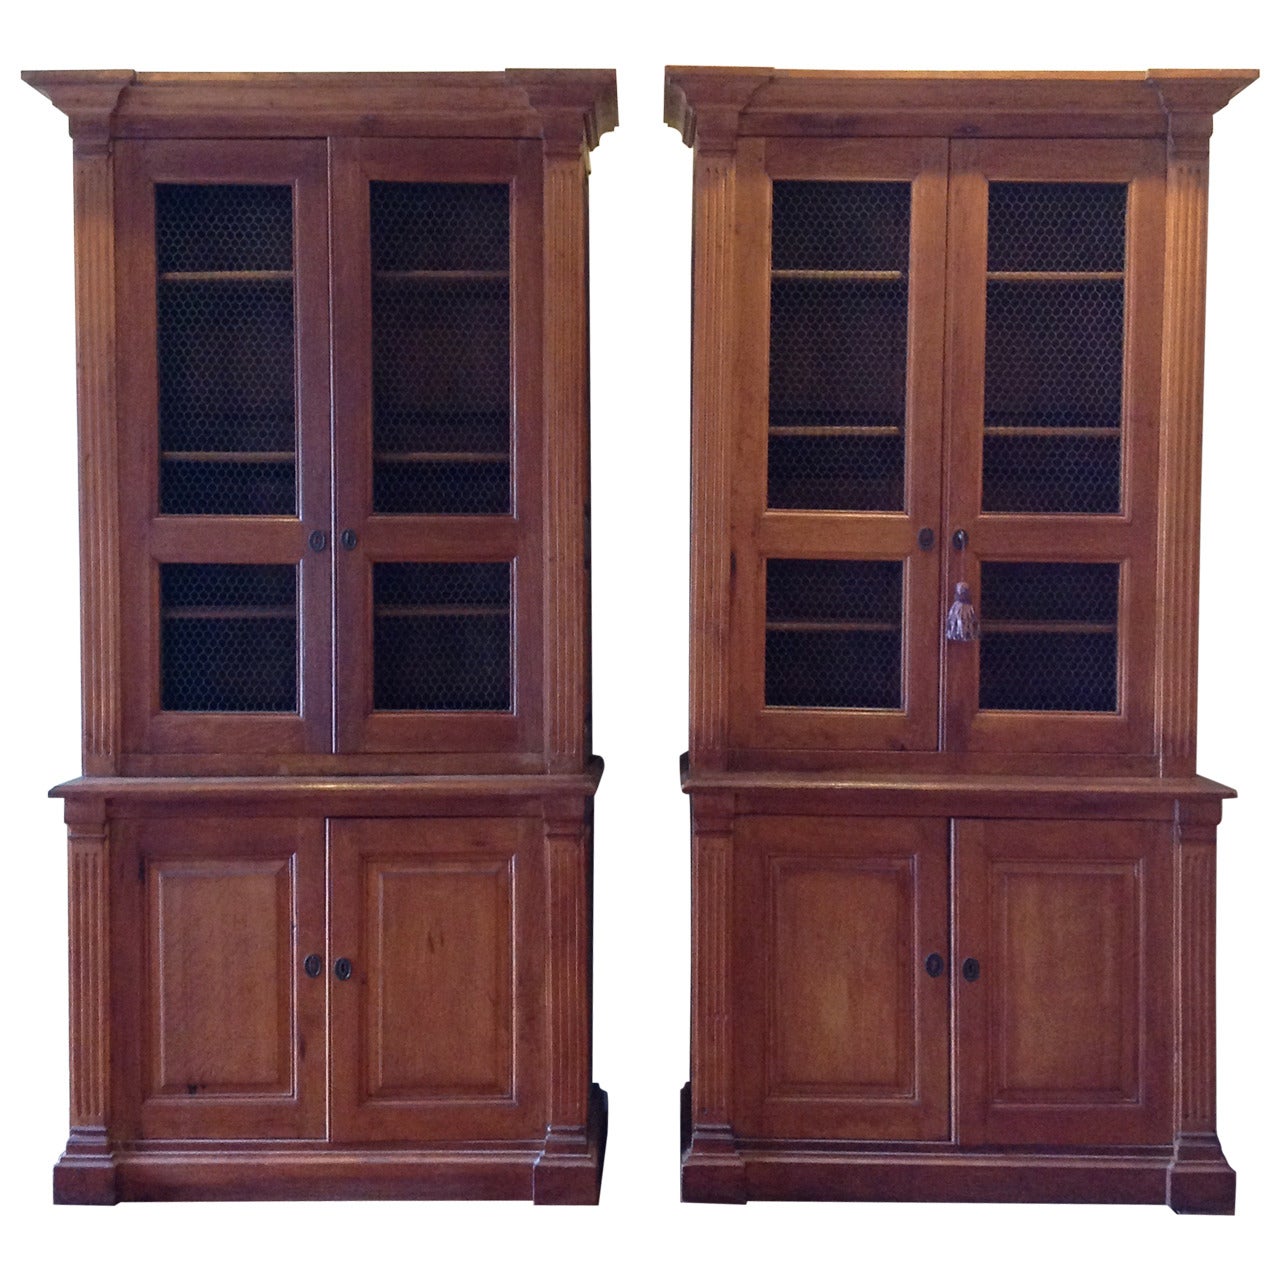 Pair of Handsome, Early 19th Century French Cabinets or Bibliotheques For Sale